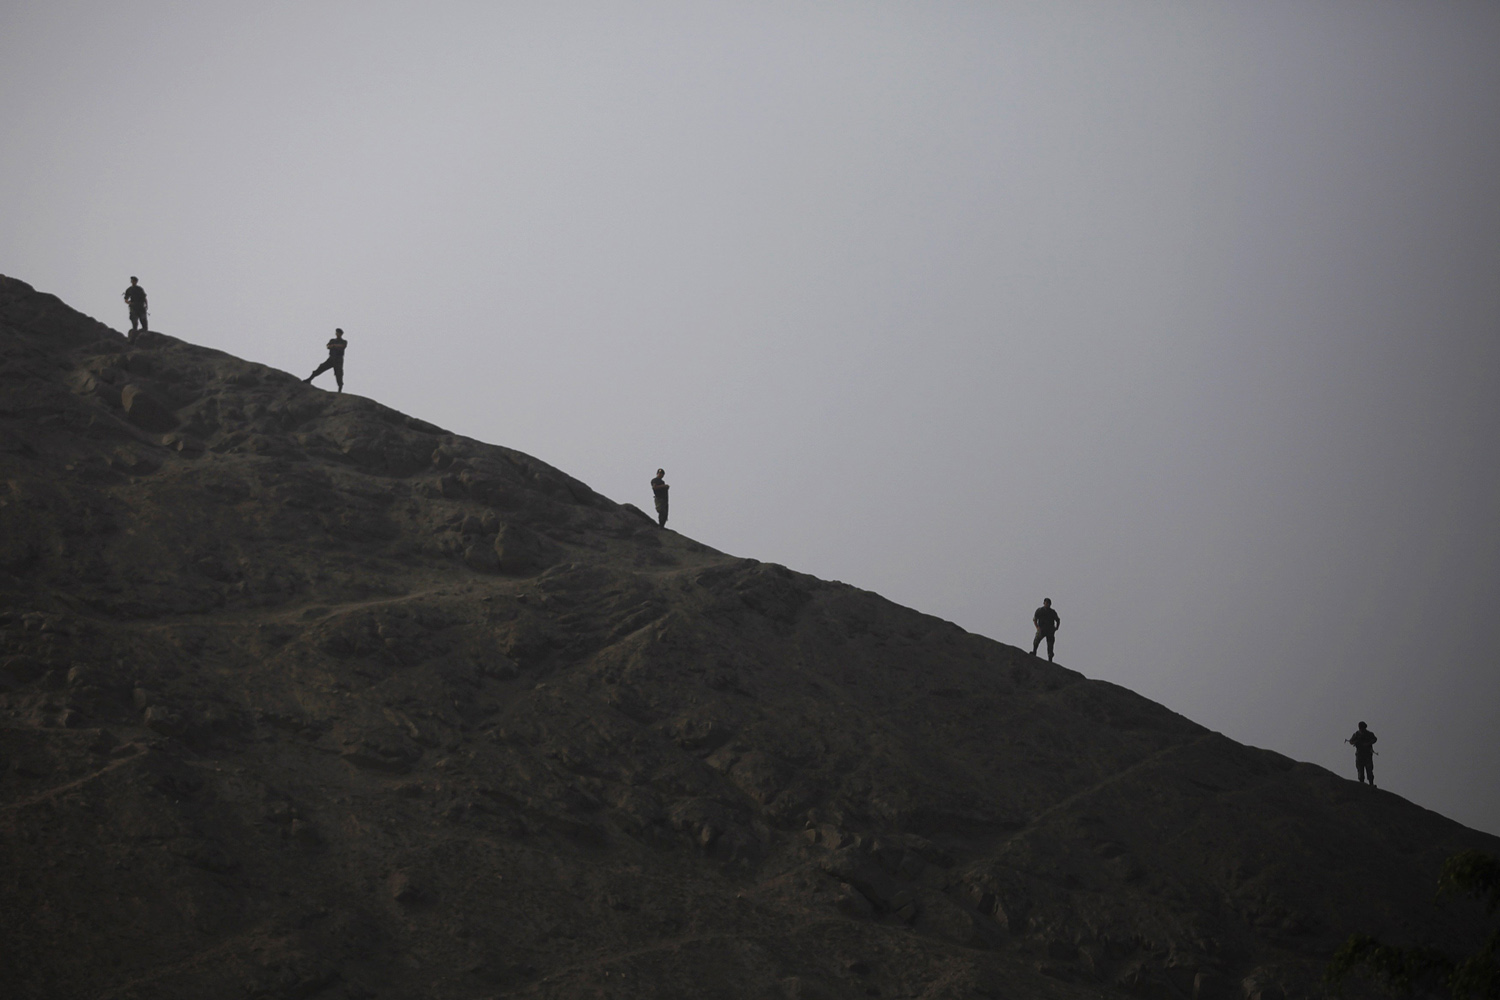 Nov. 26, 2013. Anti-narcotics police officers guard on top of a hill near an oven during a drug incineration in Lima, Peru.